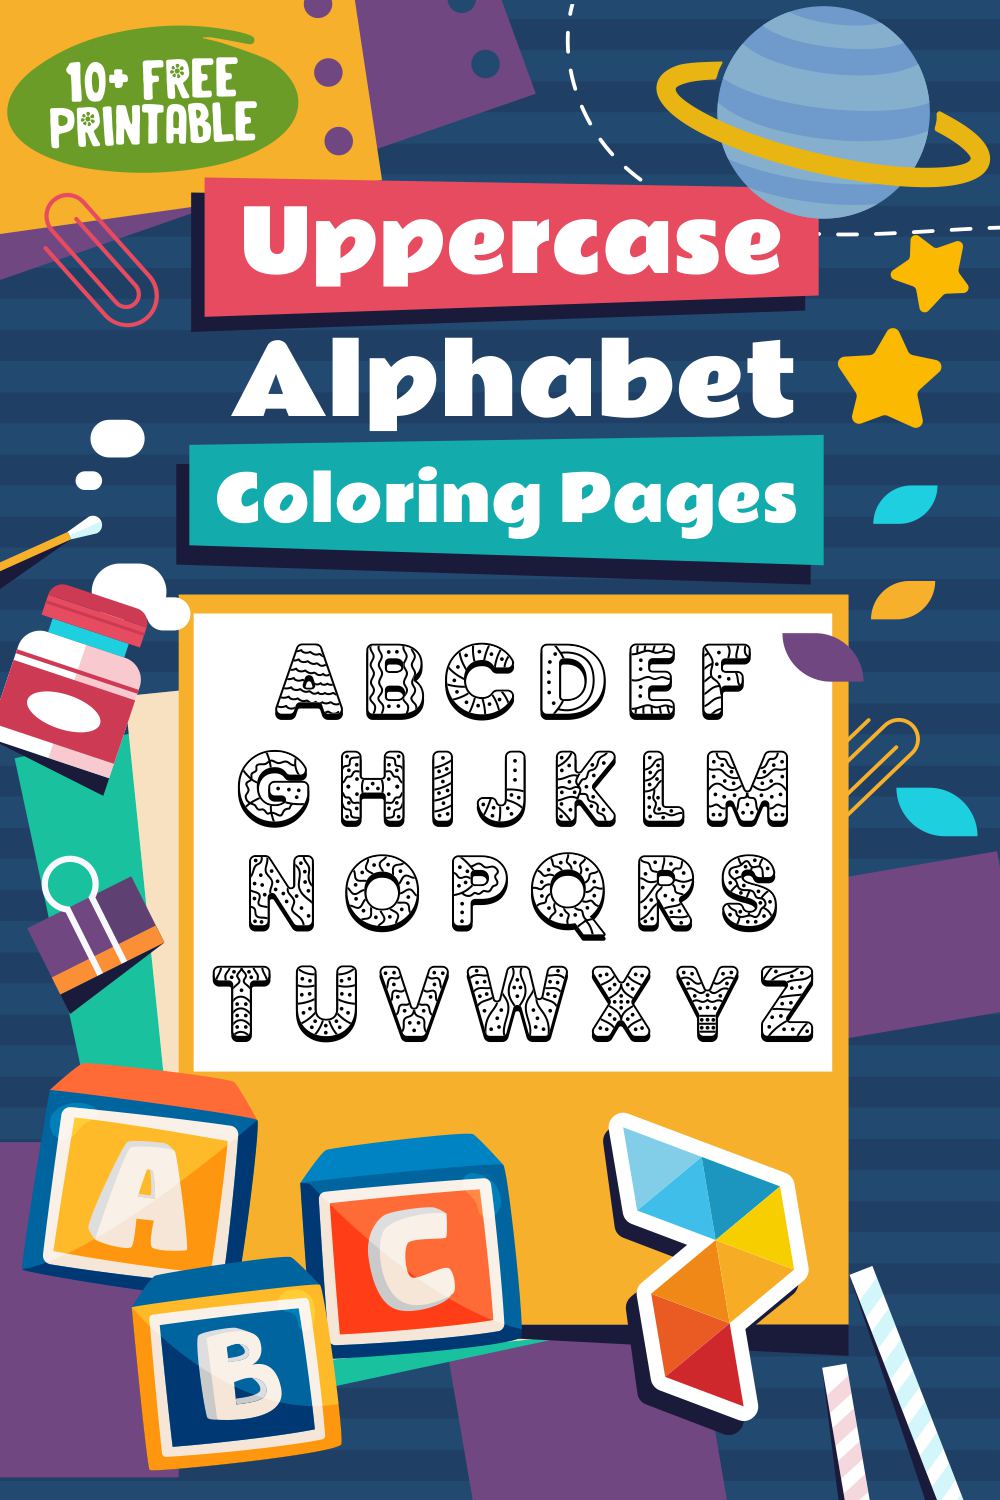 Uppercase Alphabet Coloring Pages